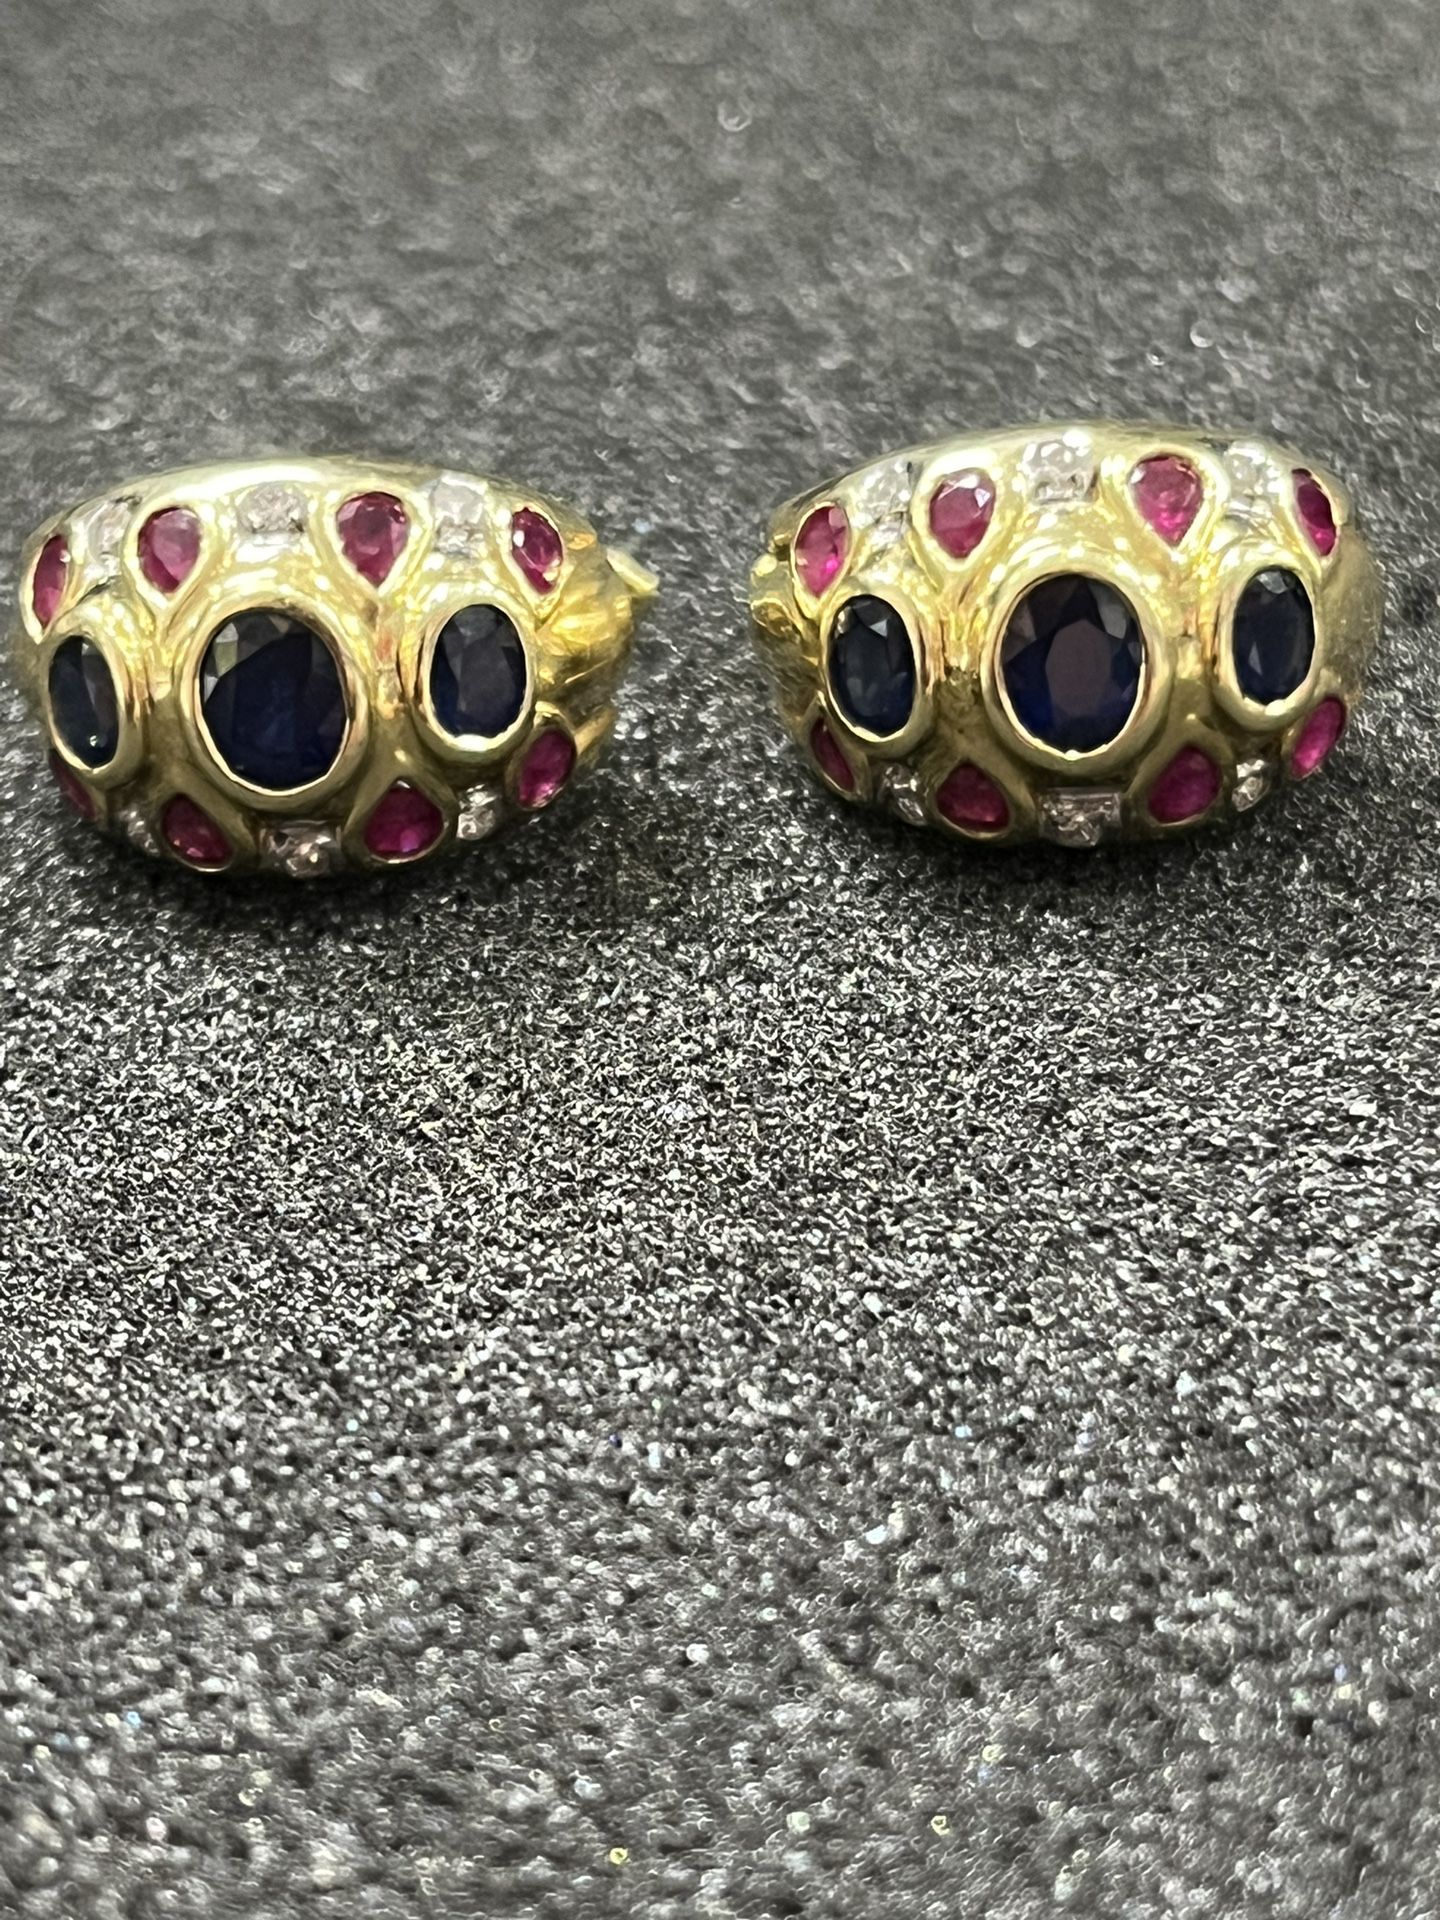 14k Gold earrings 9.2 grams with diamonds  Sapphire and Ruby stone